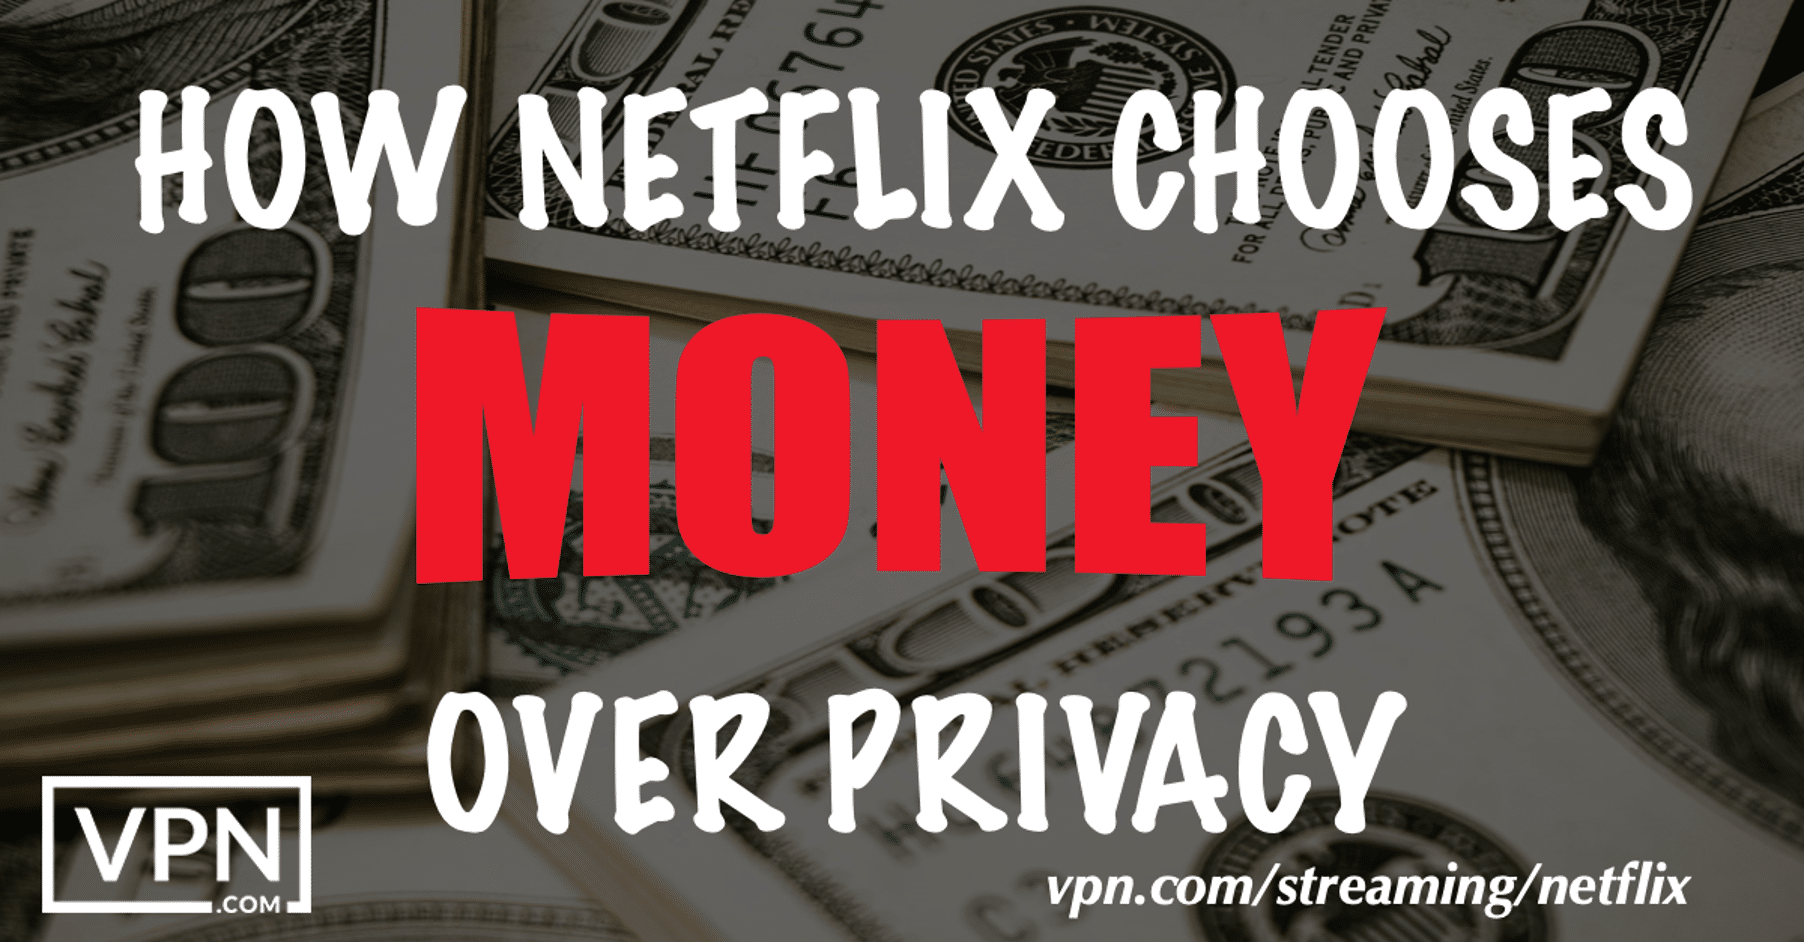 How Netflix chooses money over privacy.